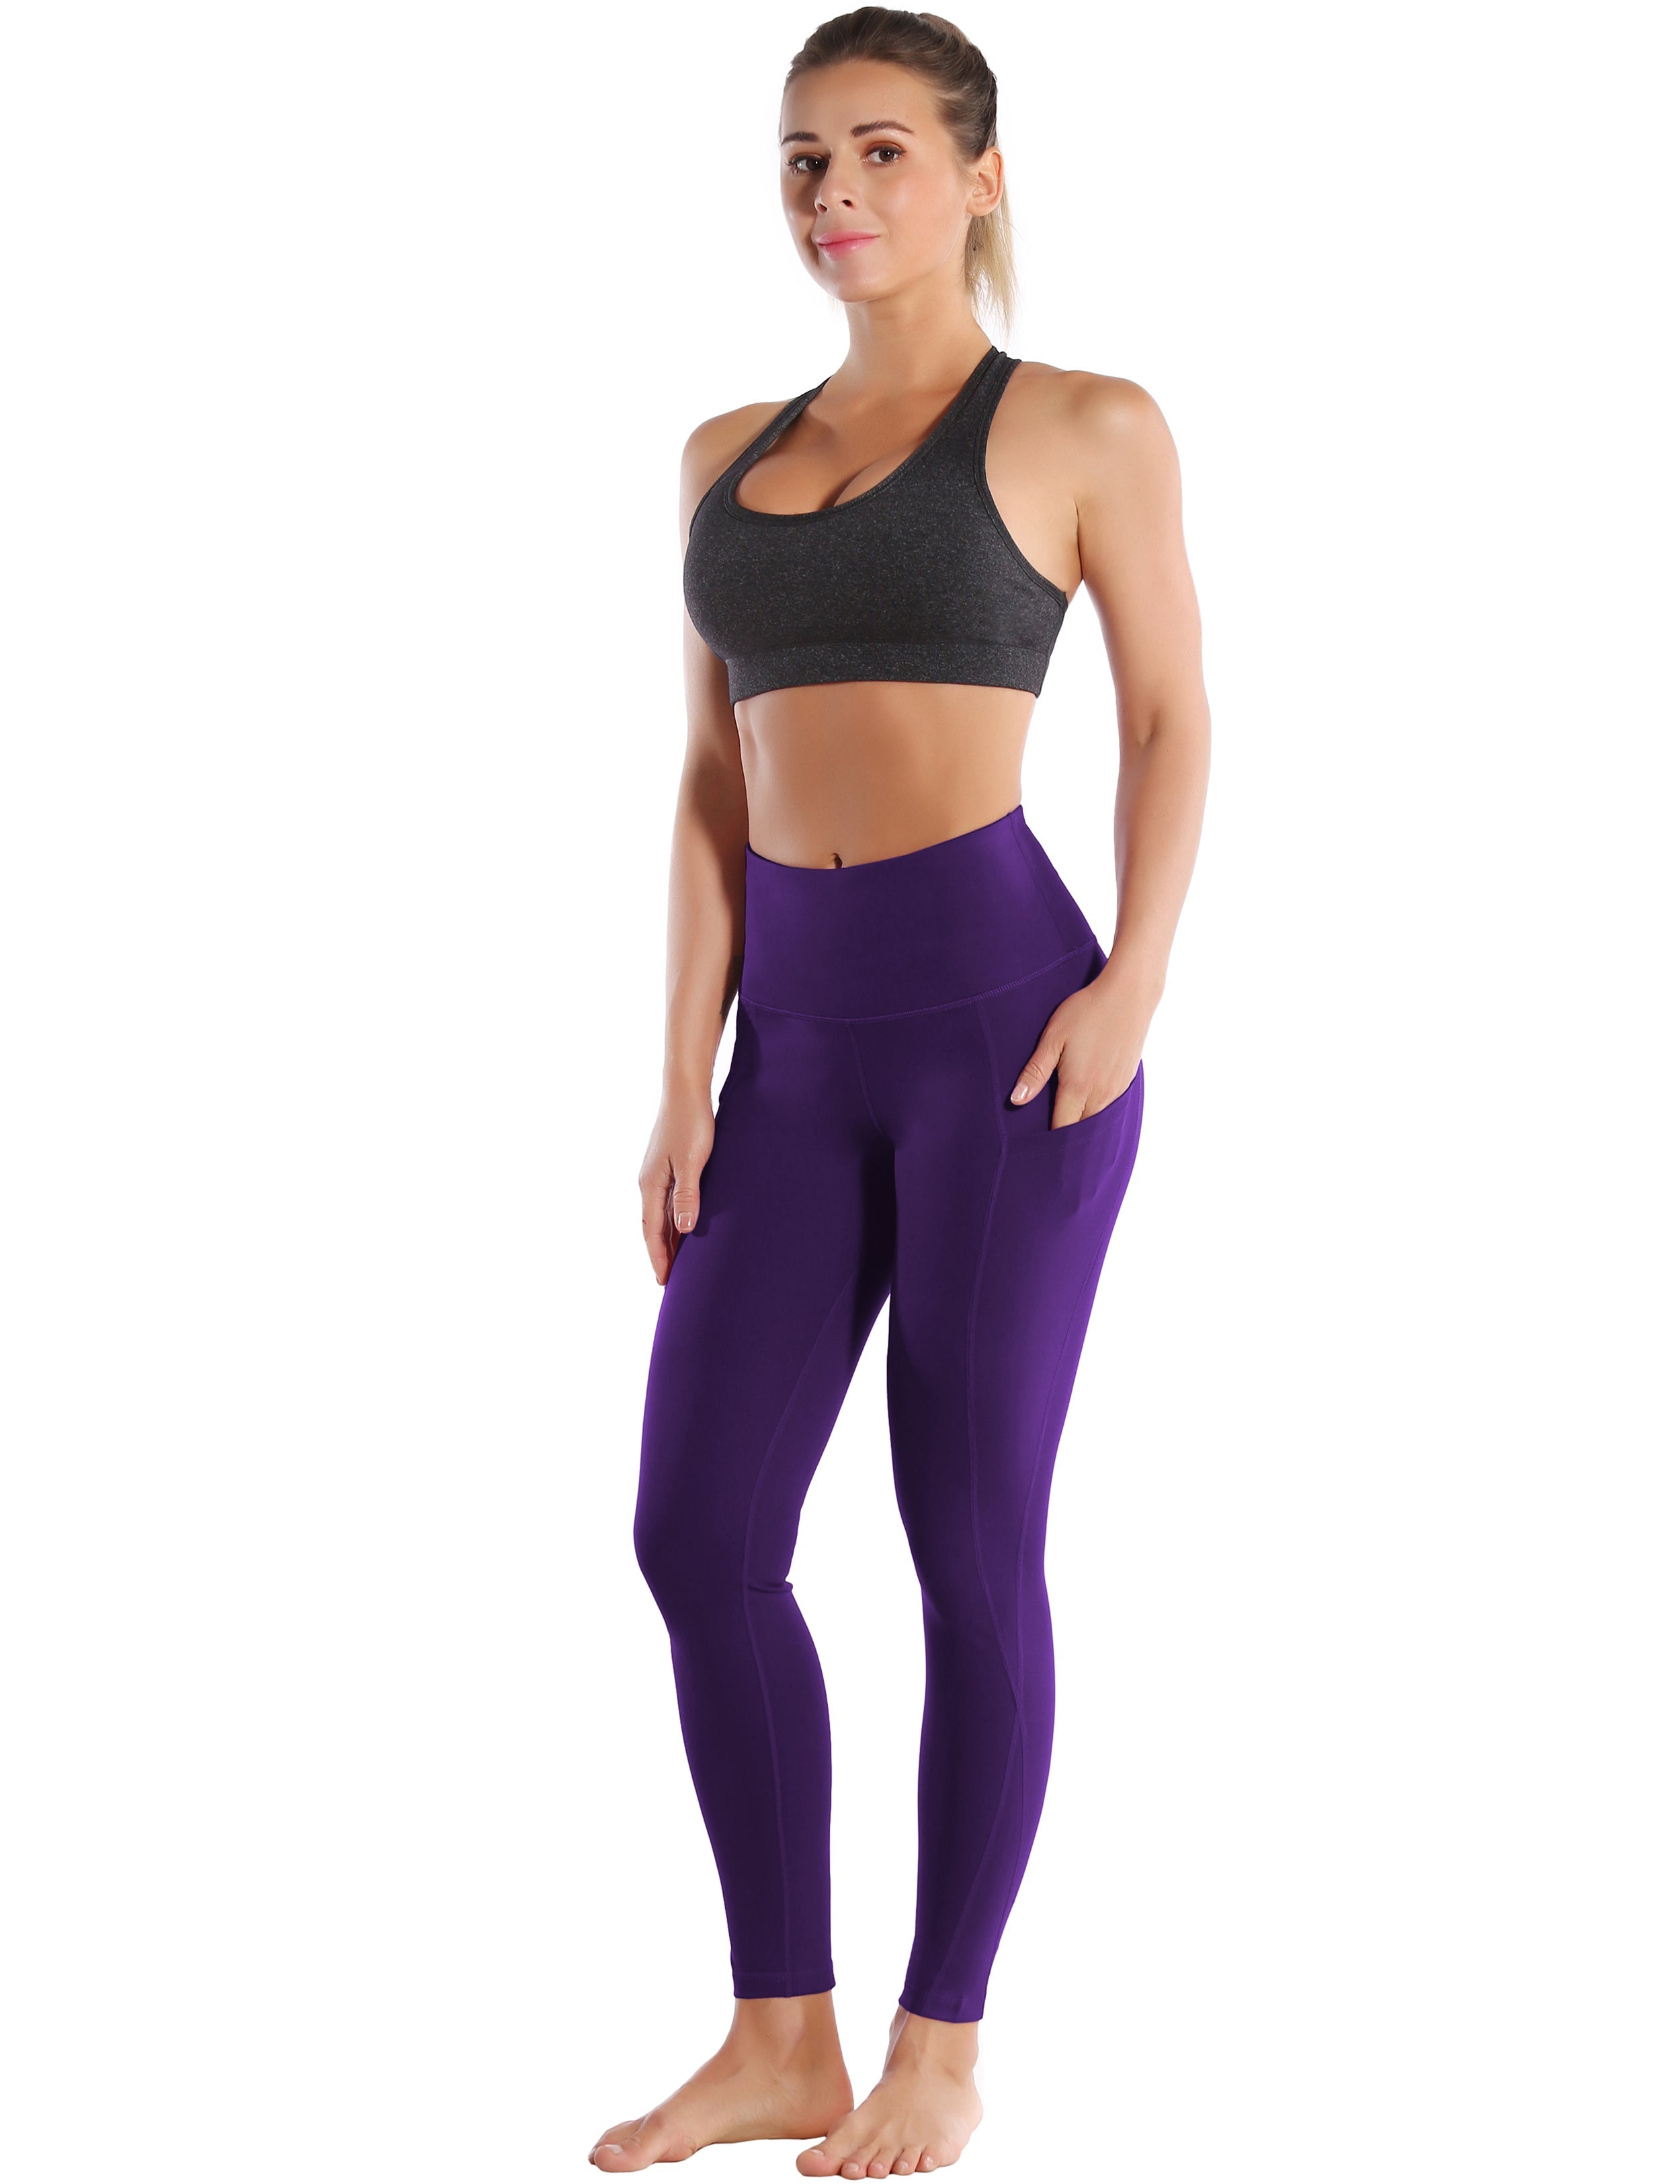 High Waist Side Pockets Golf Pants grapevine 75% Nylon, 25% Spandex Fabric doesn't attract lint easily 4-way stretch No see-through Moisture-wicking Tummy control Inner pocket